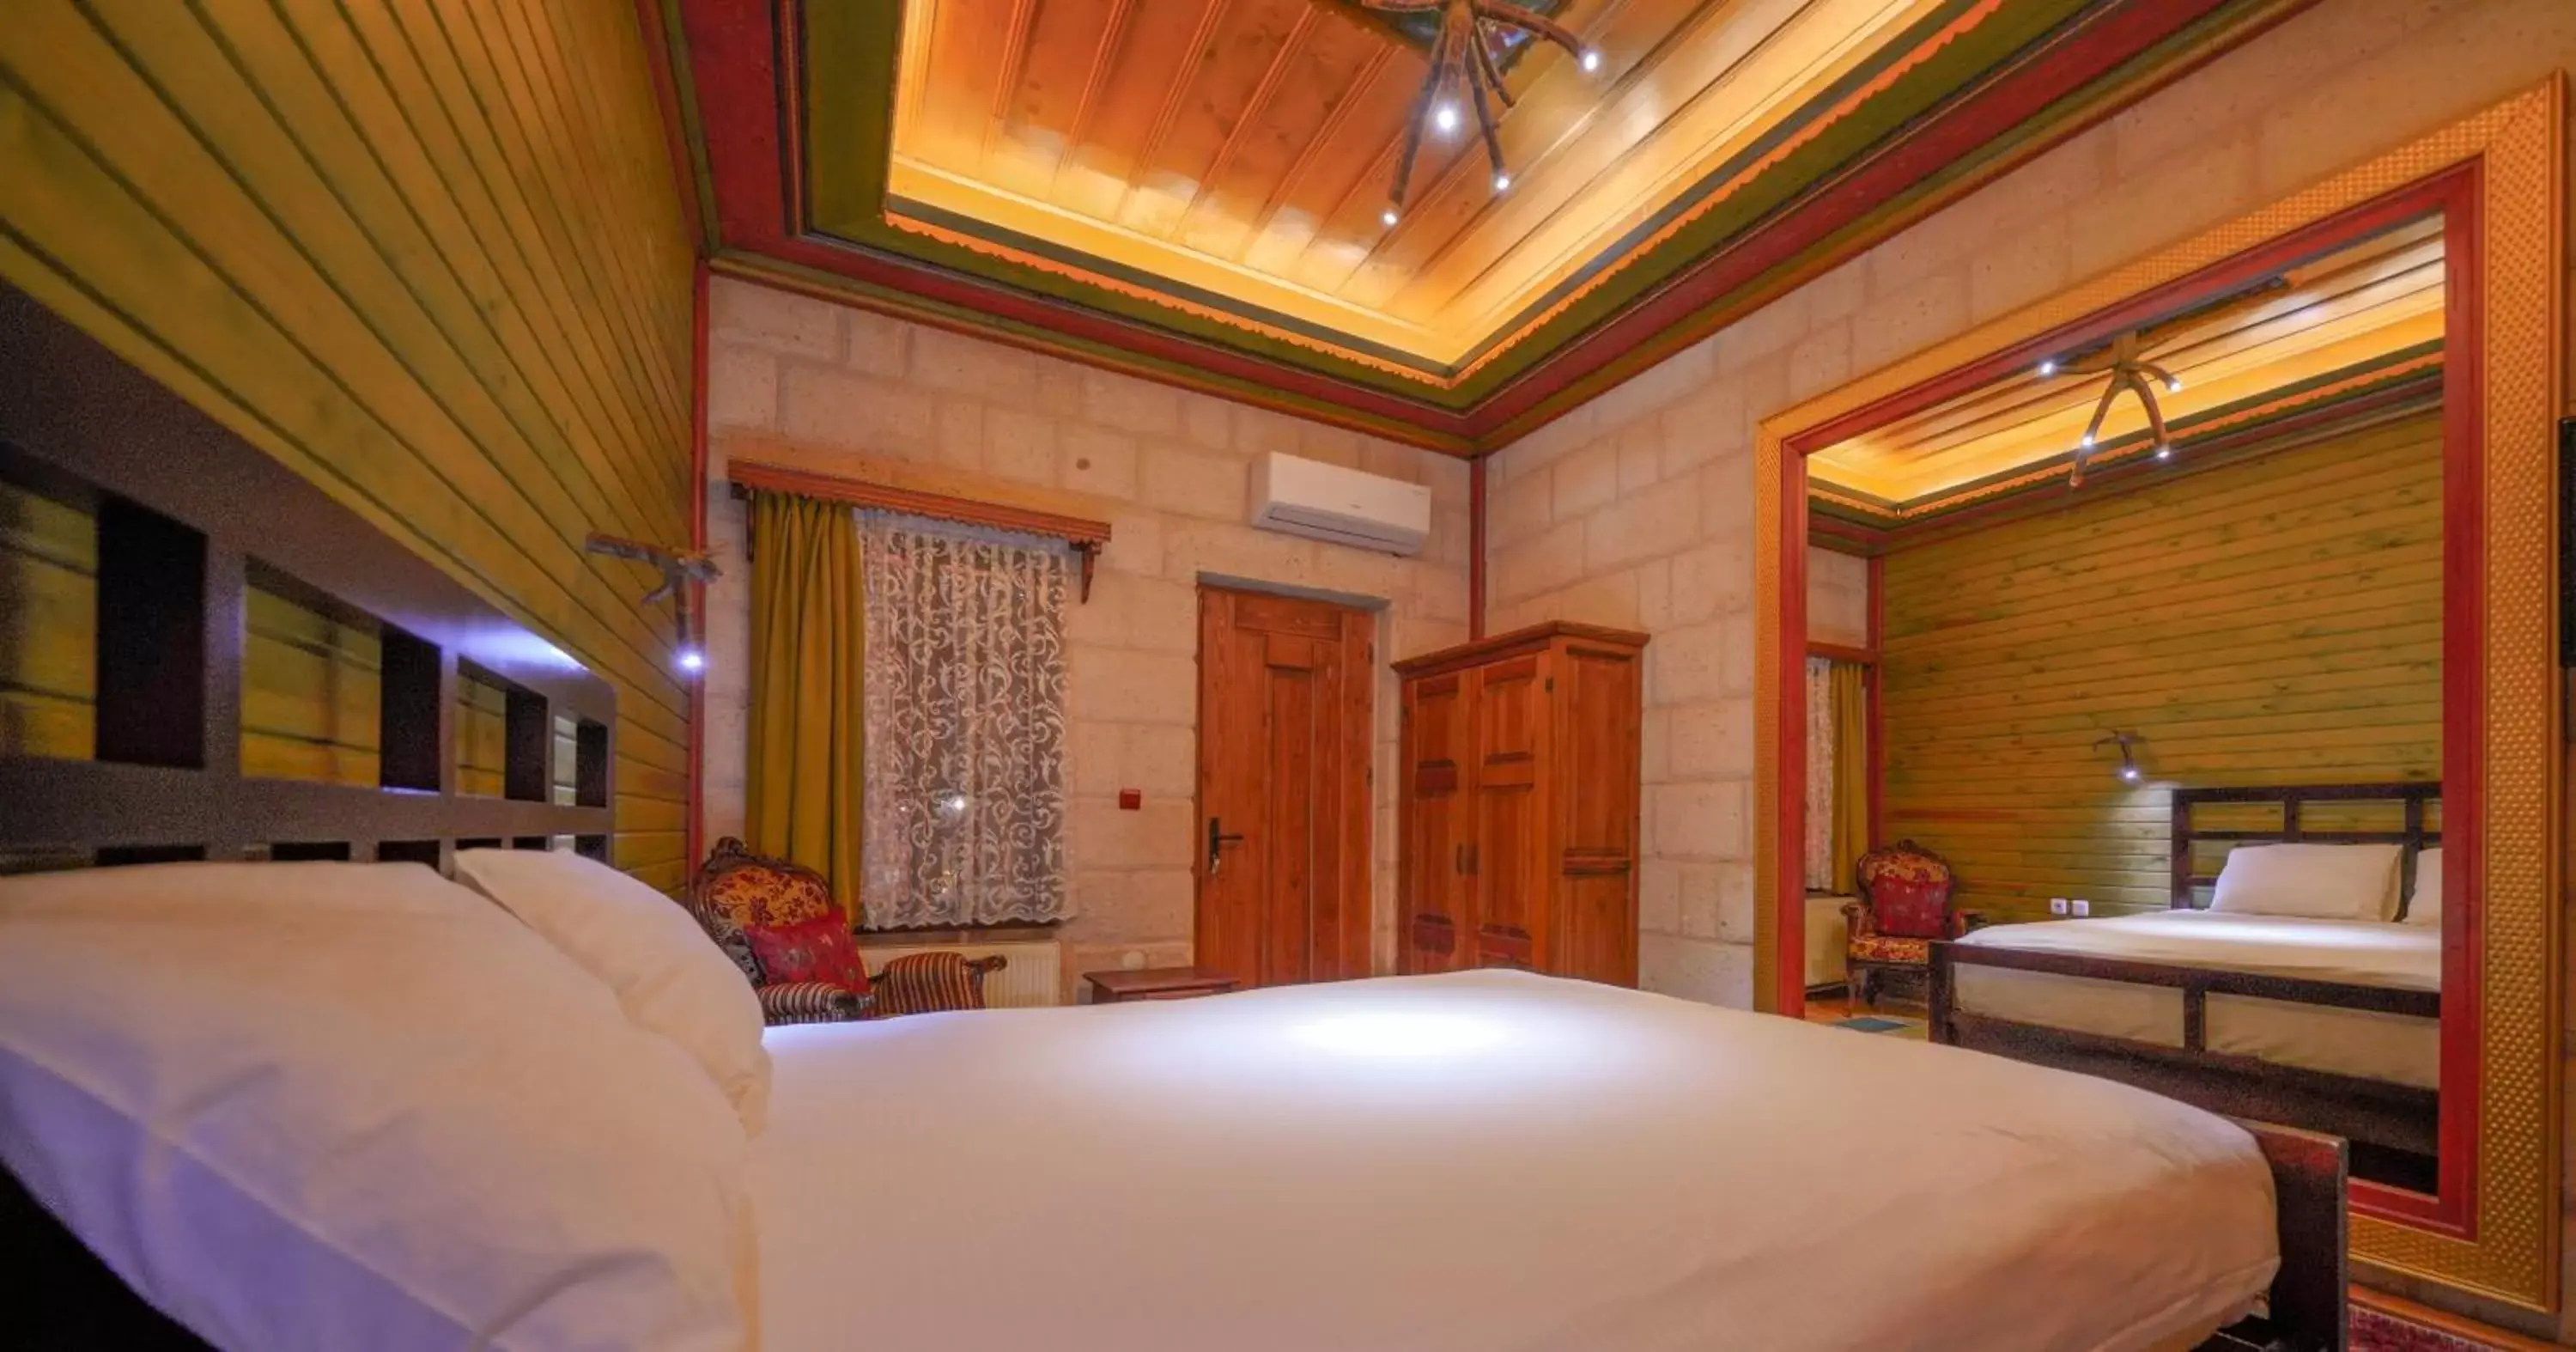 Massage, Bed in Local Cave House Hotel